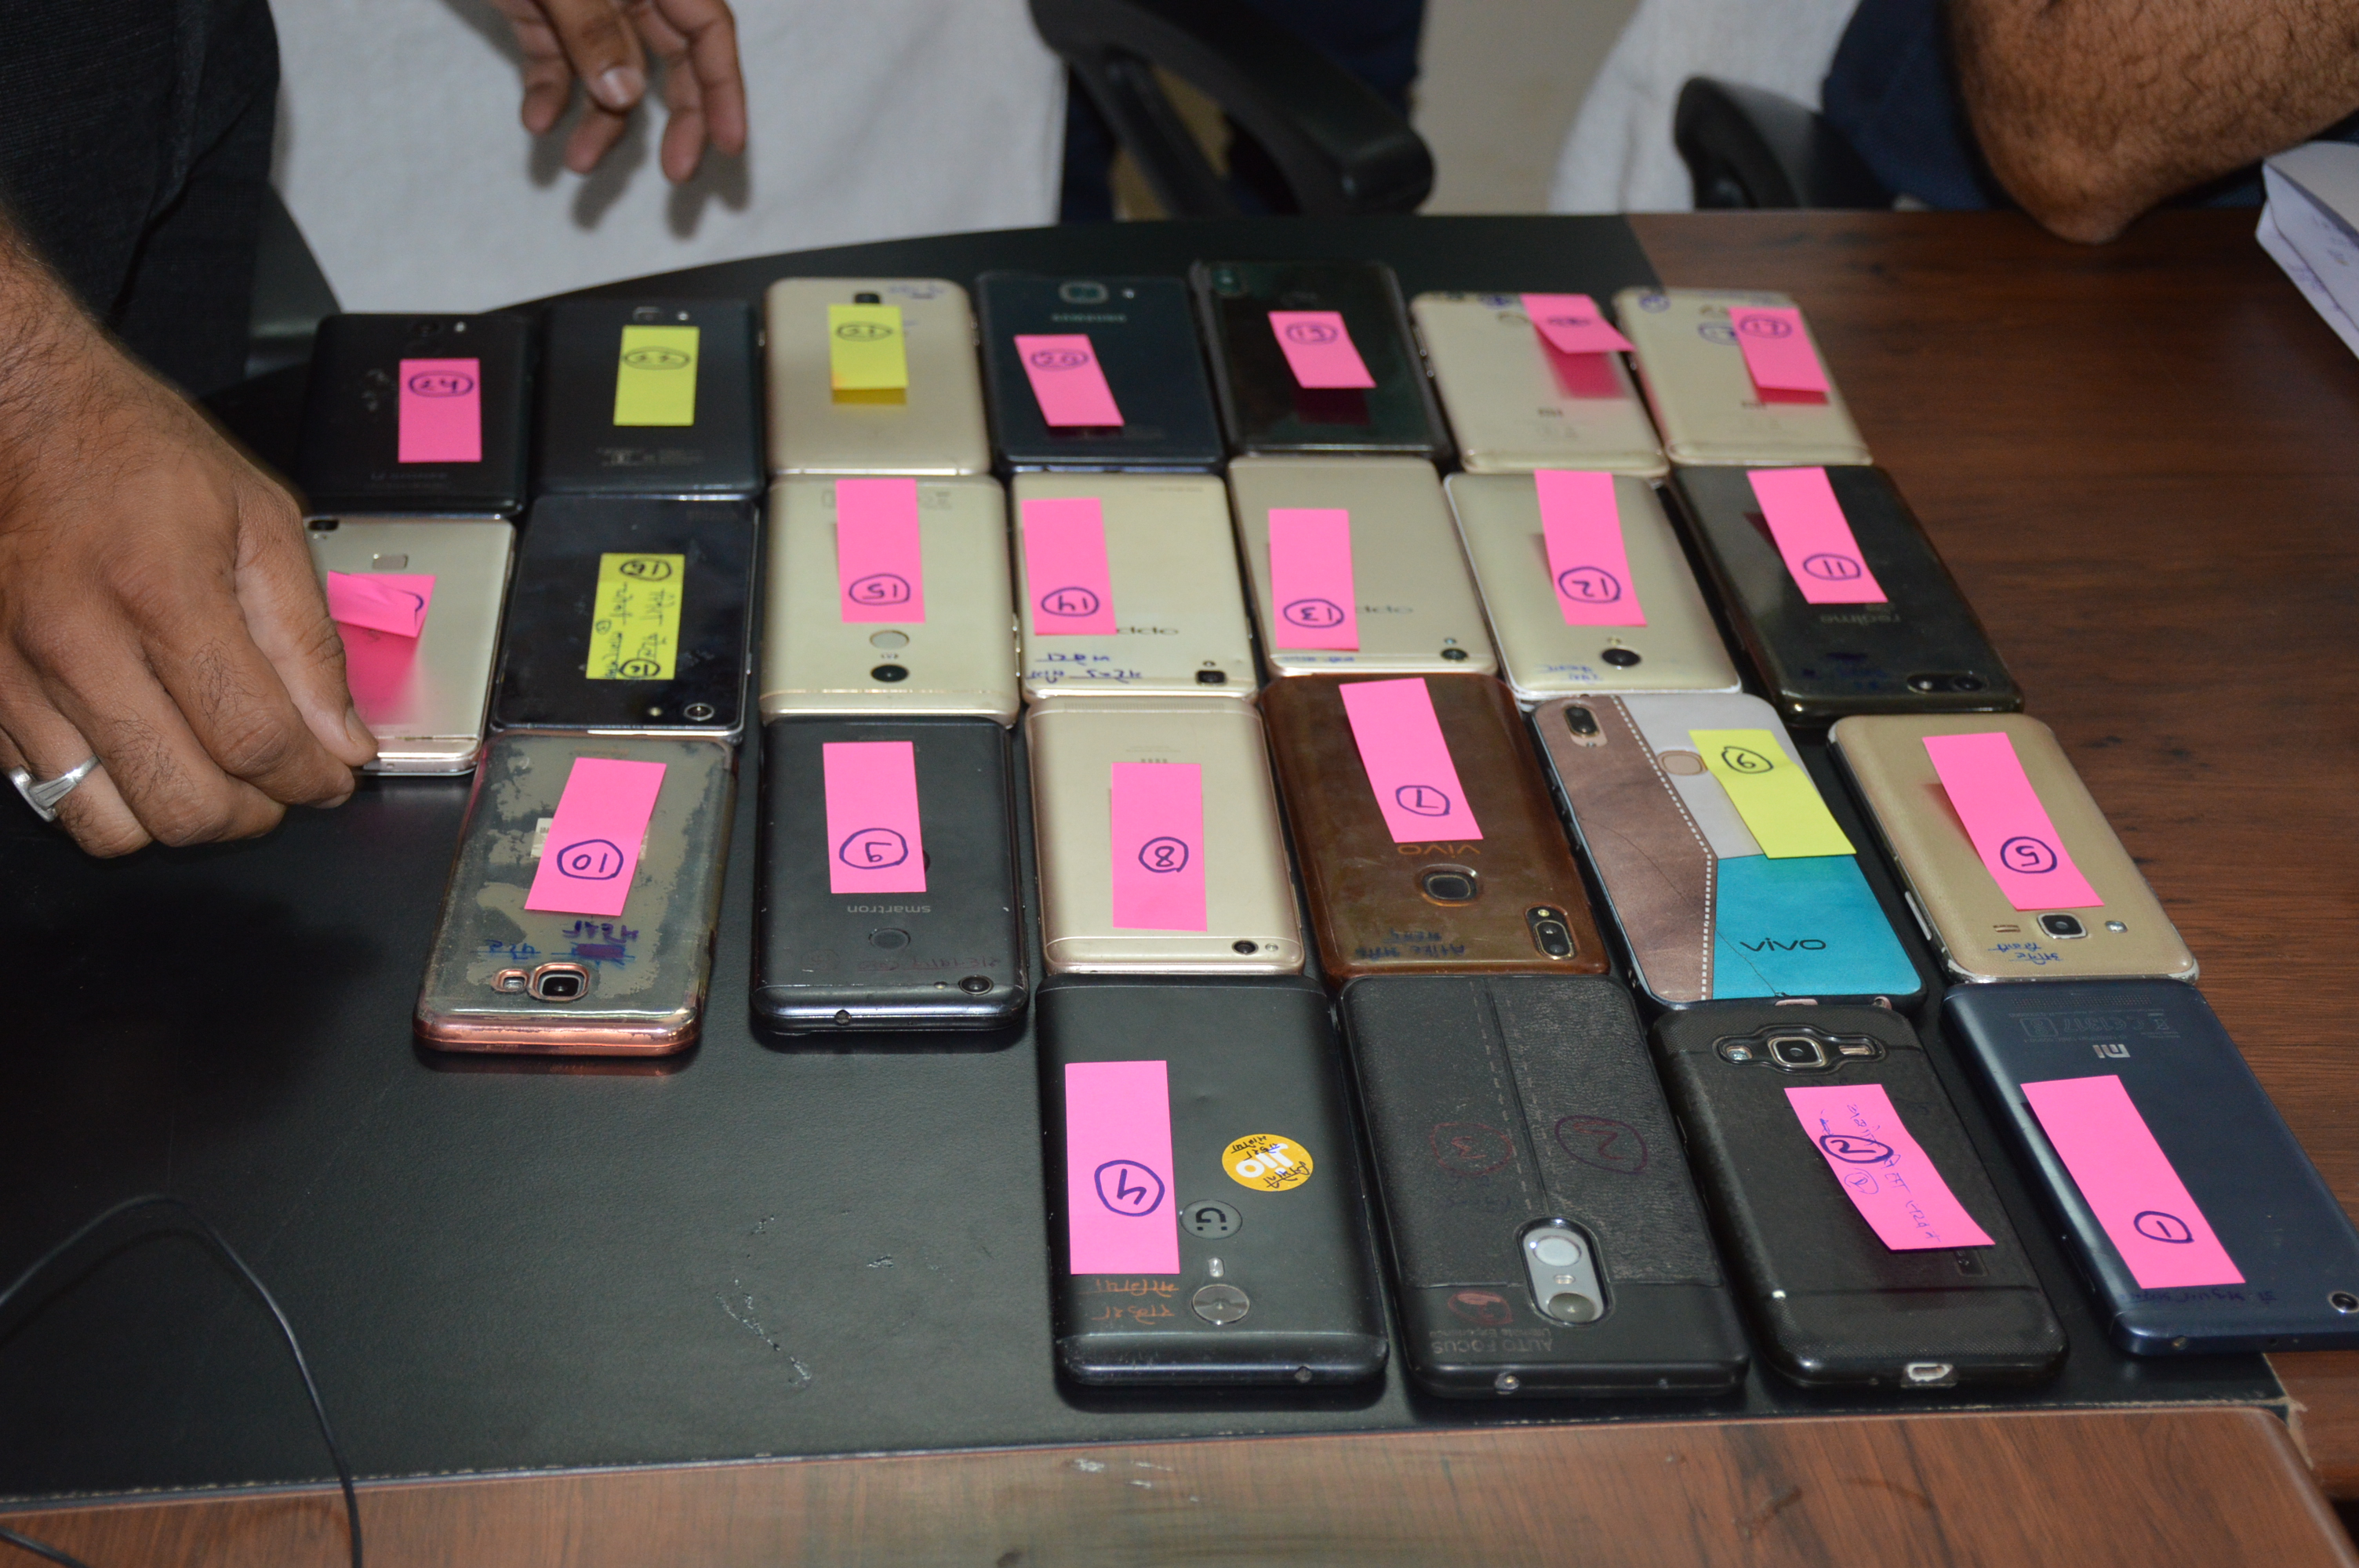 Good job: Seized Rs.1.5 lakhs of mobile seized and recovered by the po